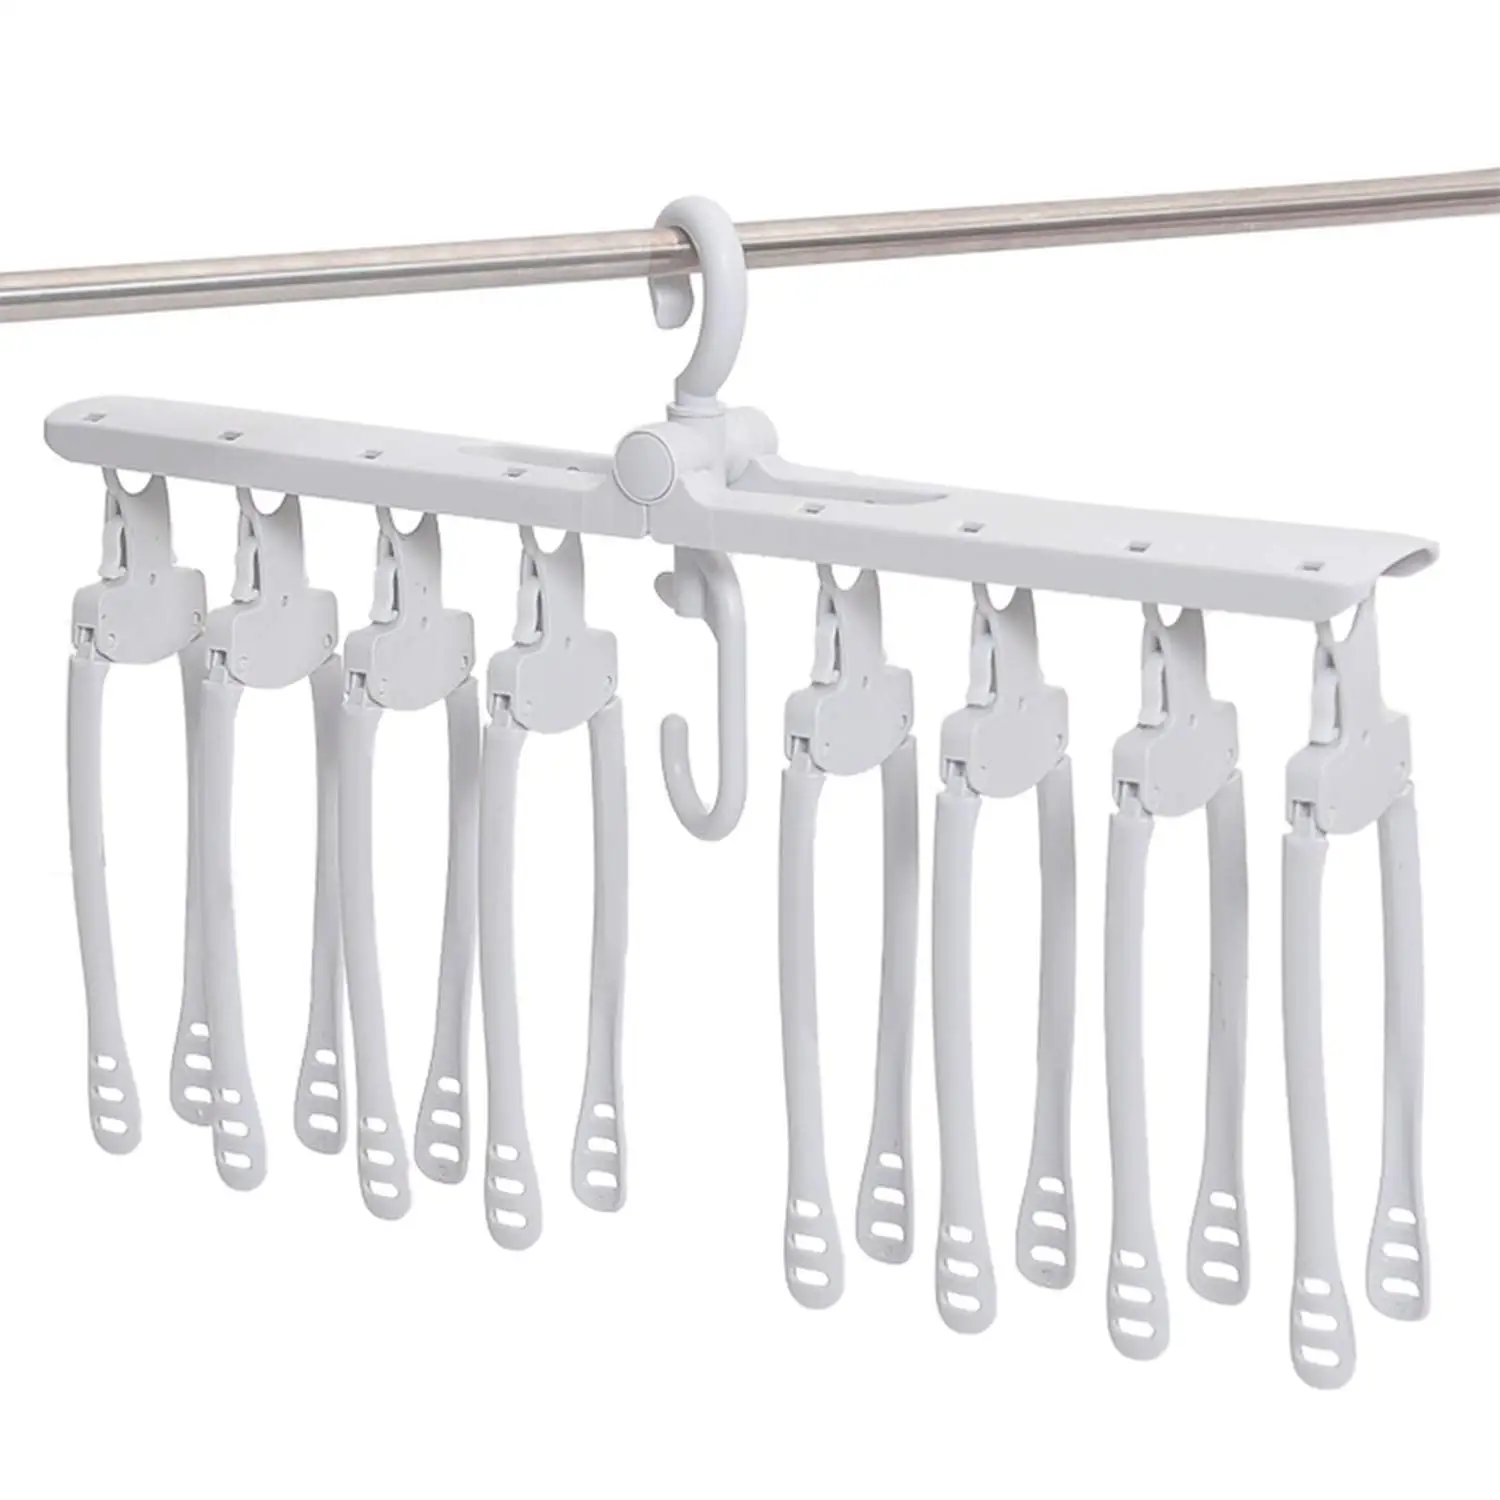 Pack of 8 NAHAO Adjustable Clothes Hangers Expandable Durable Stainless Steel DIY Telescopic Hanger Drying Storage Wardrobe Hanger for Kids Children and Adults 